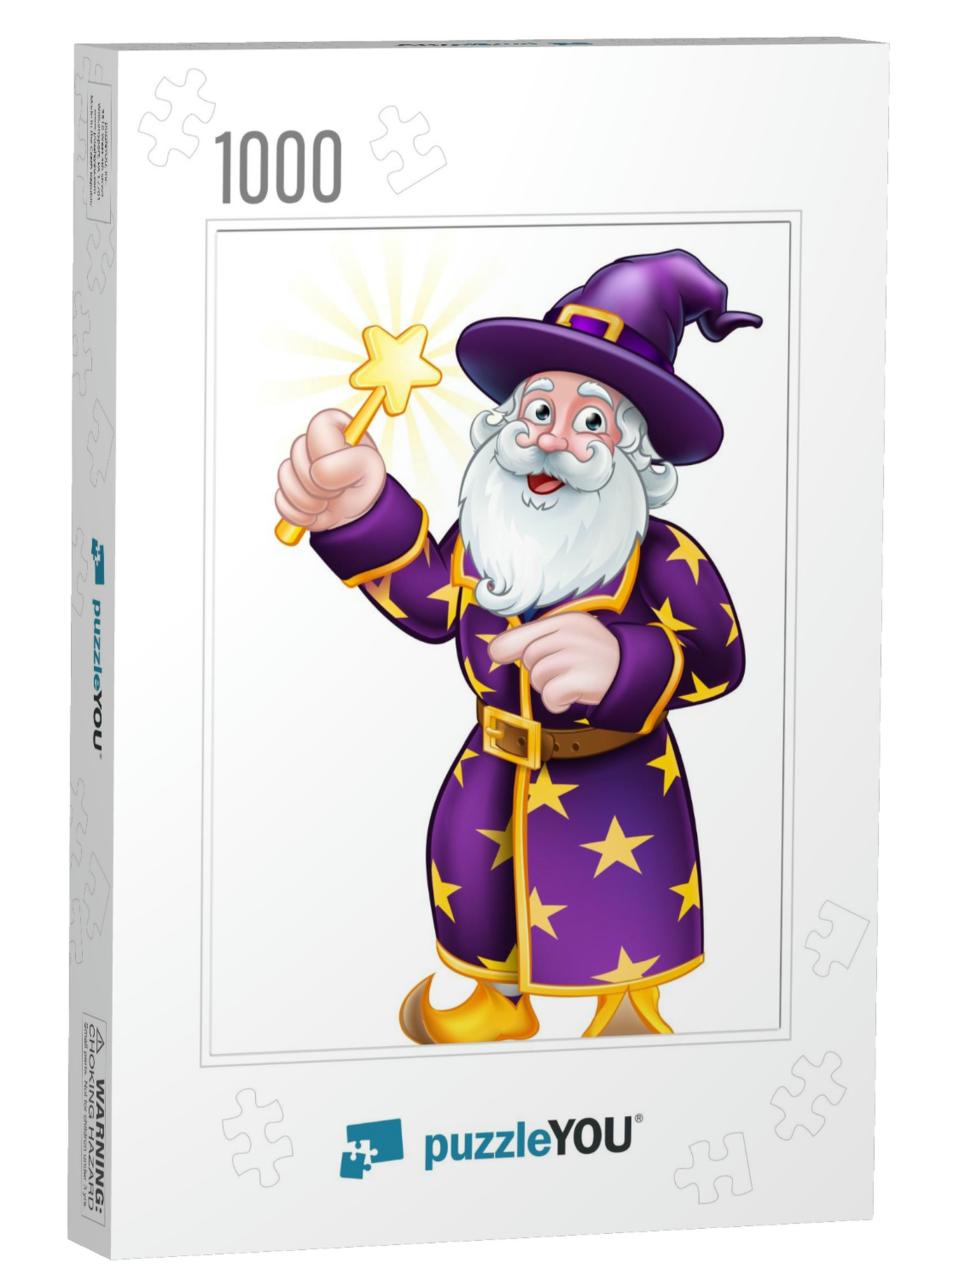 A Cute Wizard Cartoon Character Holding a Magic Wand... Jigsaw Puzzle with 1000 pieces